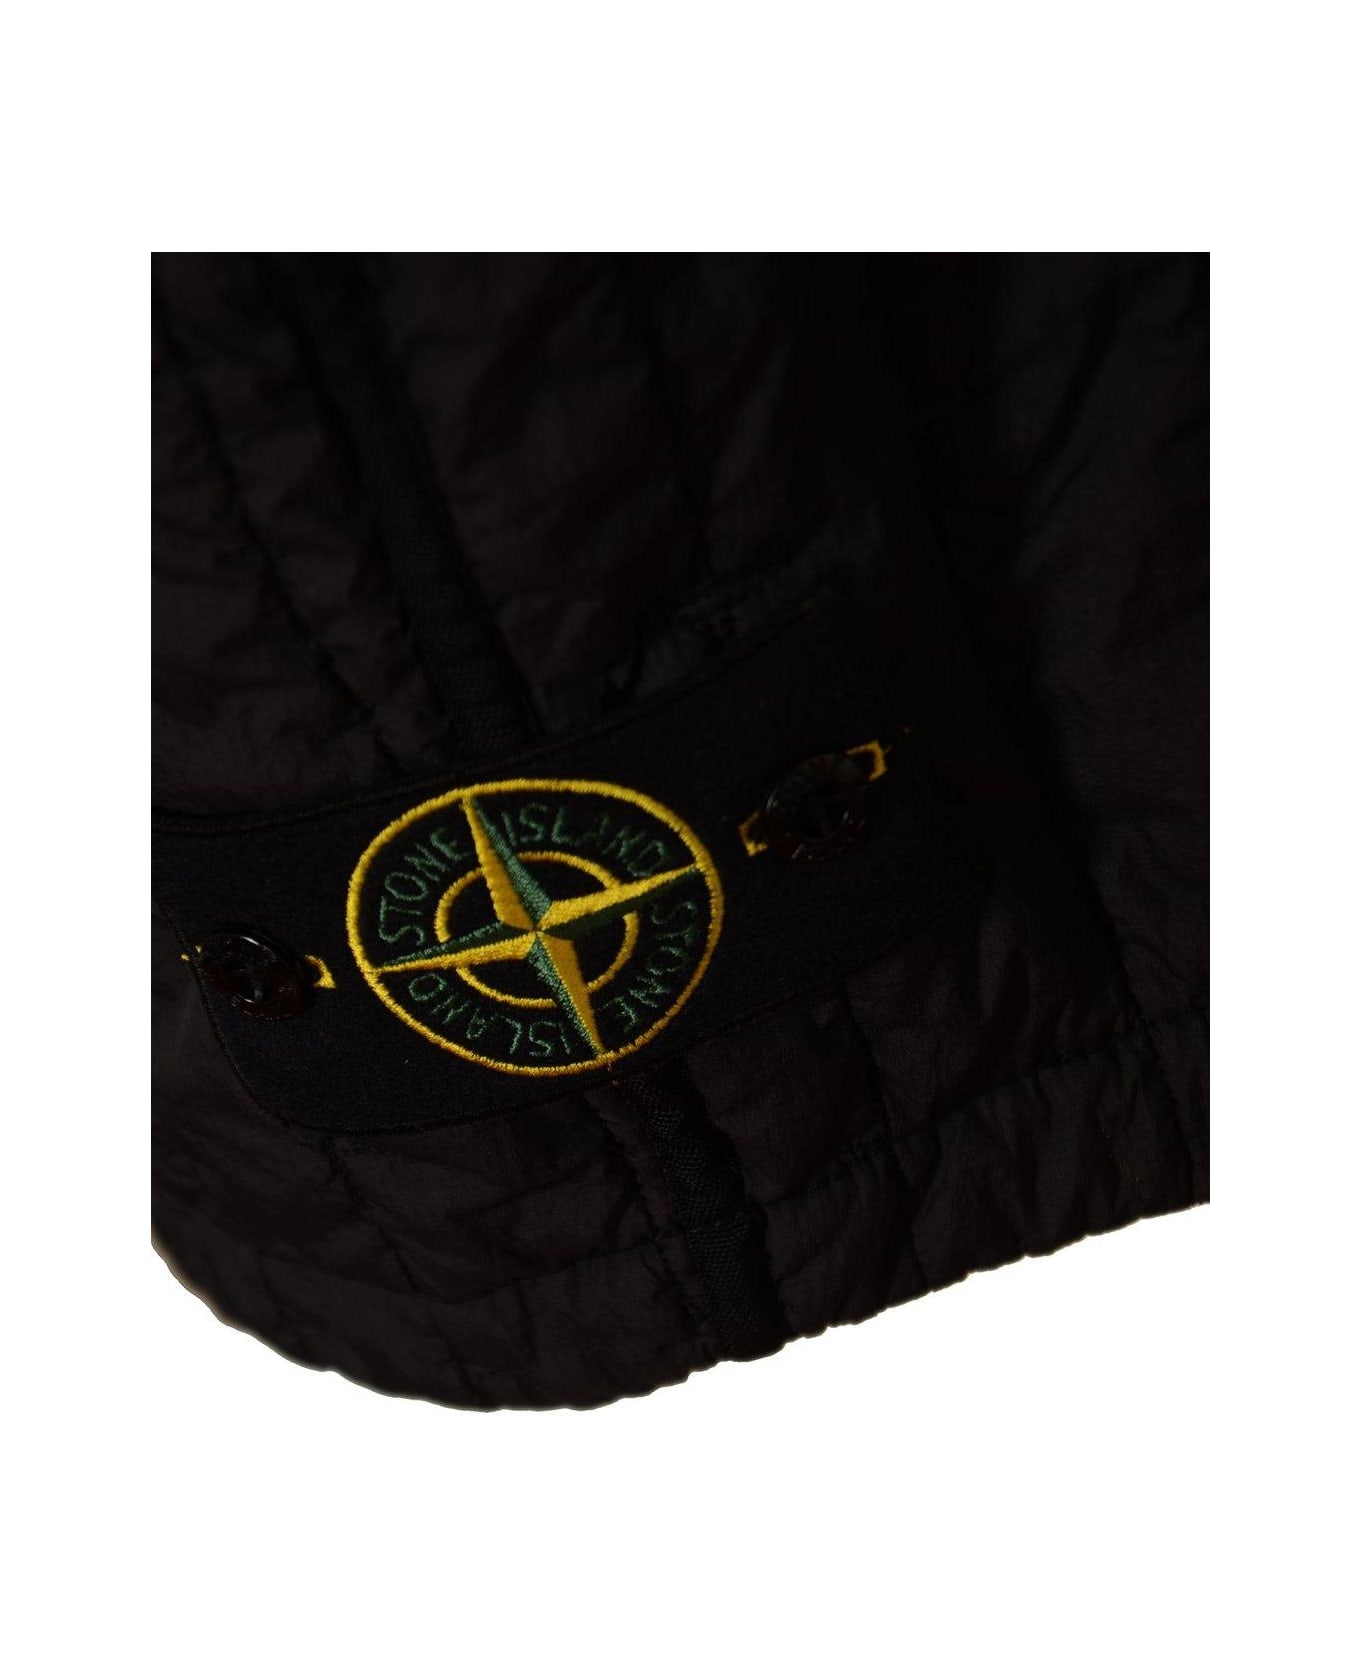 Stone Island Quilted Buttoned Vest - Nero